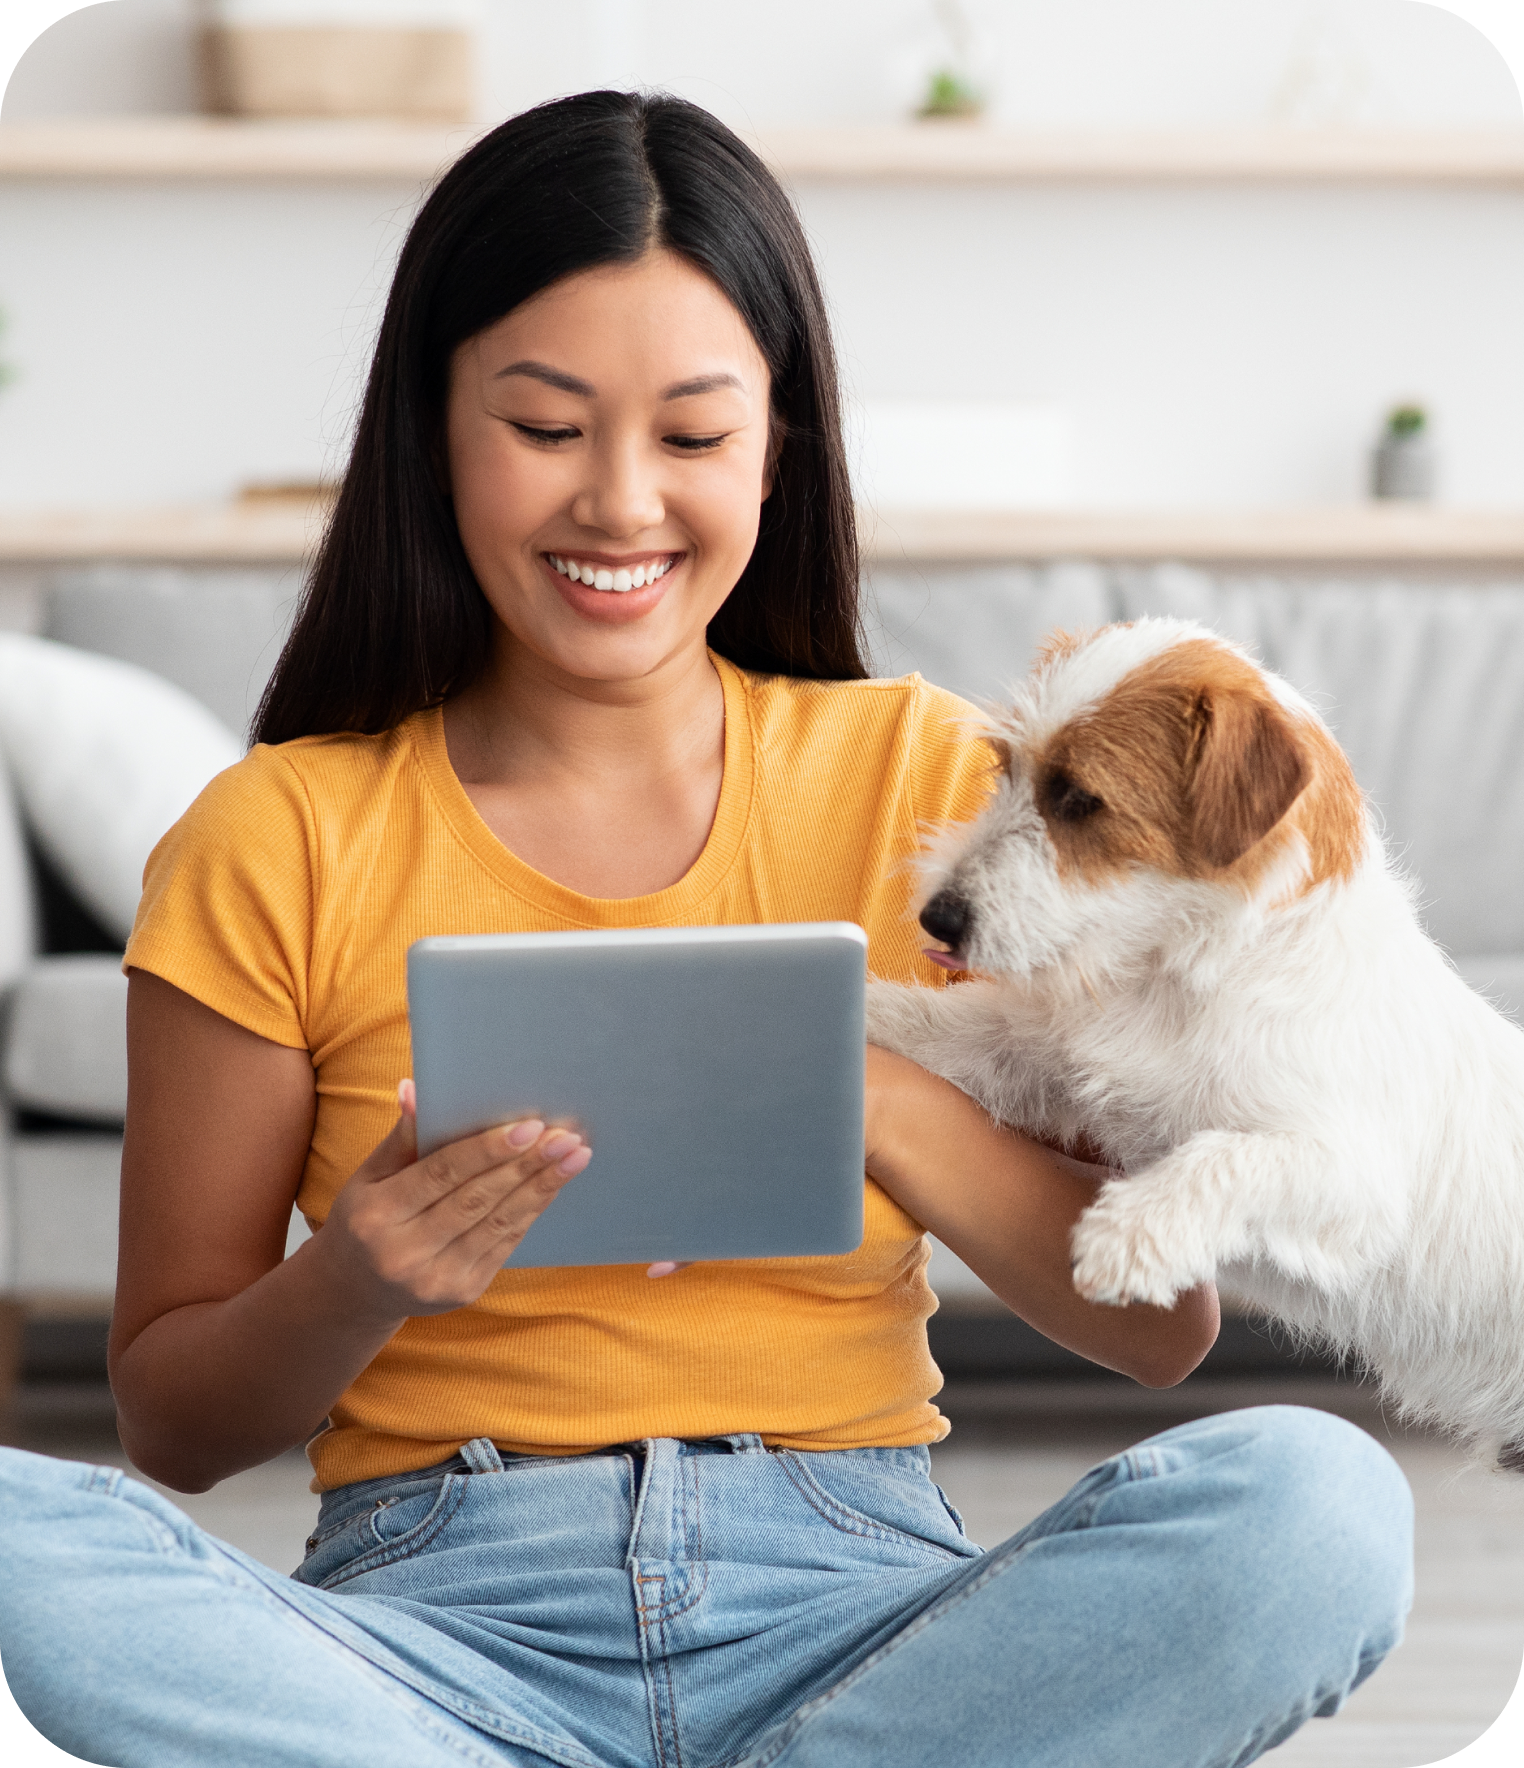 A woman smiling while sitting on the floor and pressing a tablet device in her hand. A dog is beside her peering into the tablet screen.